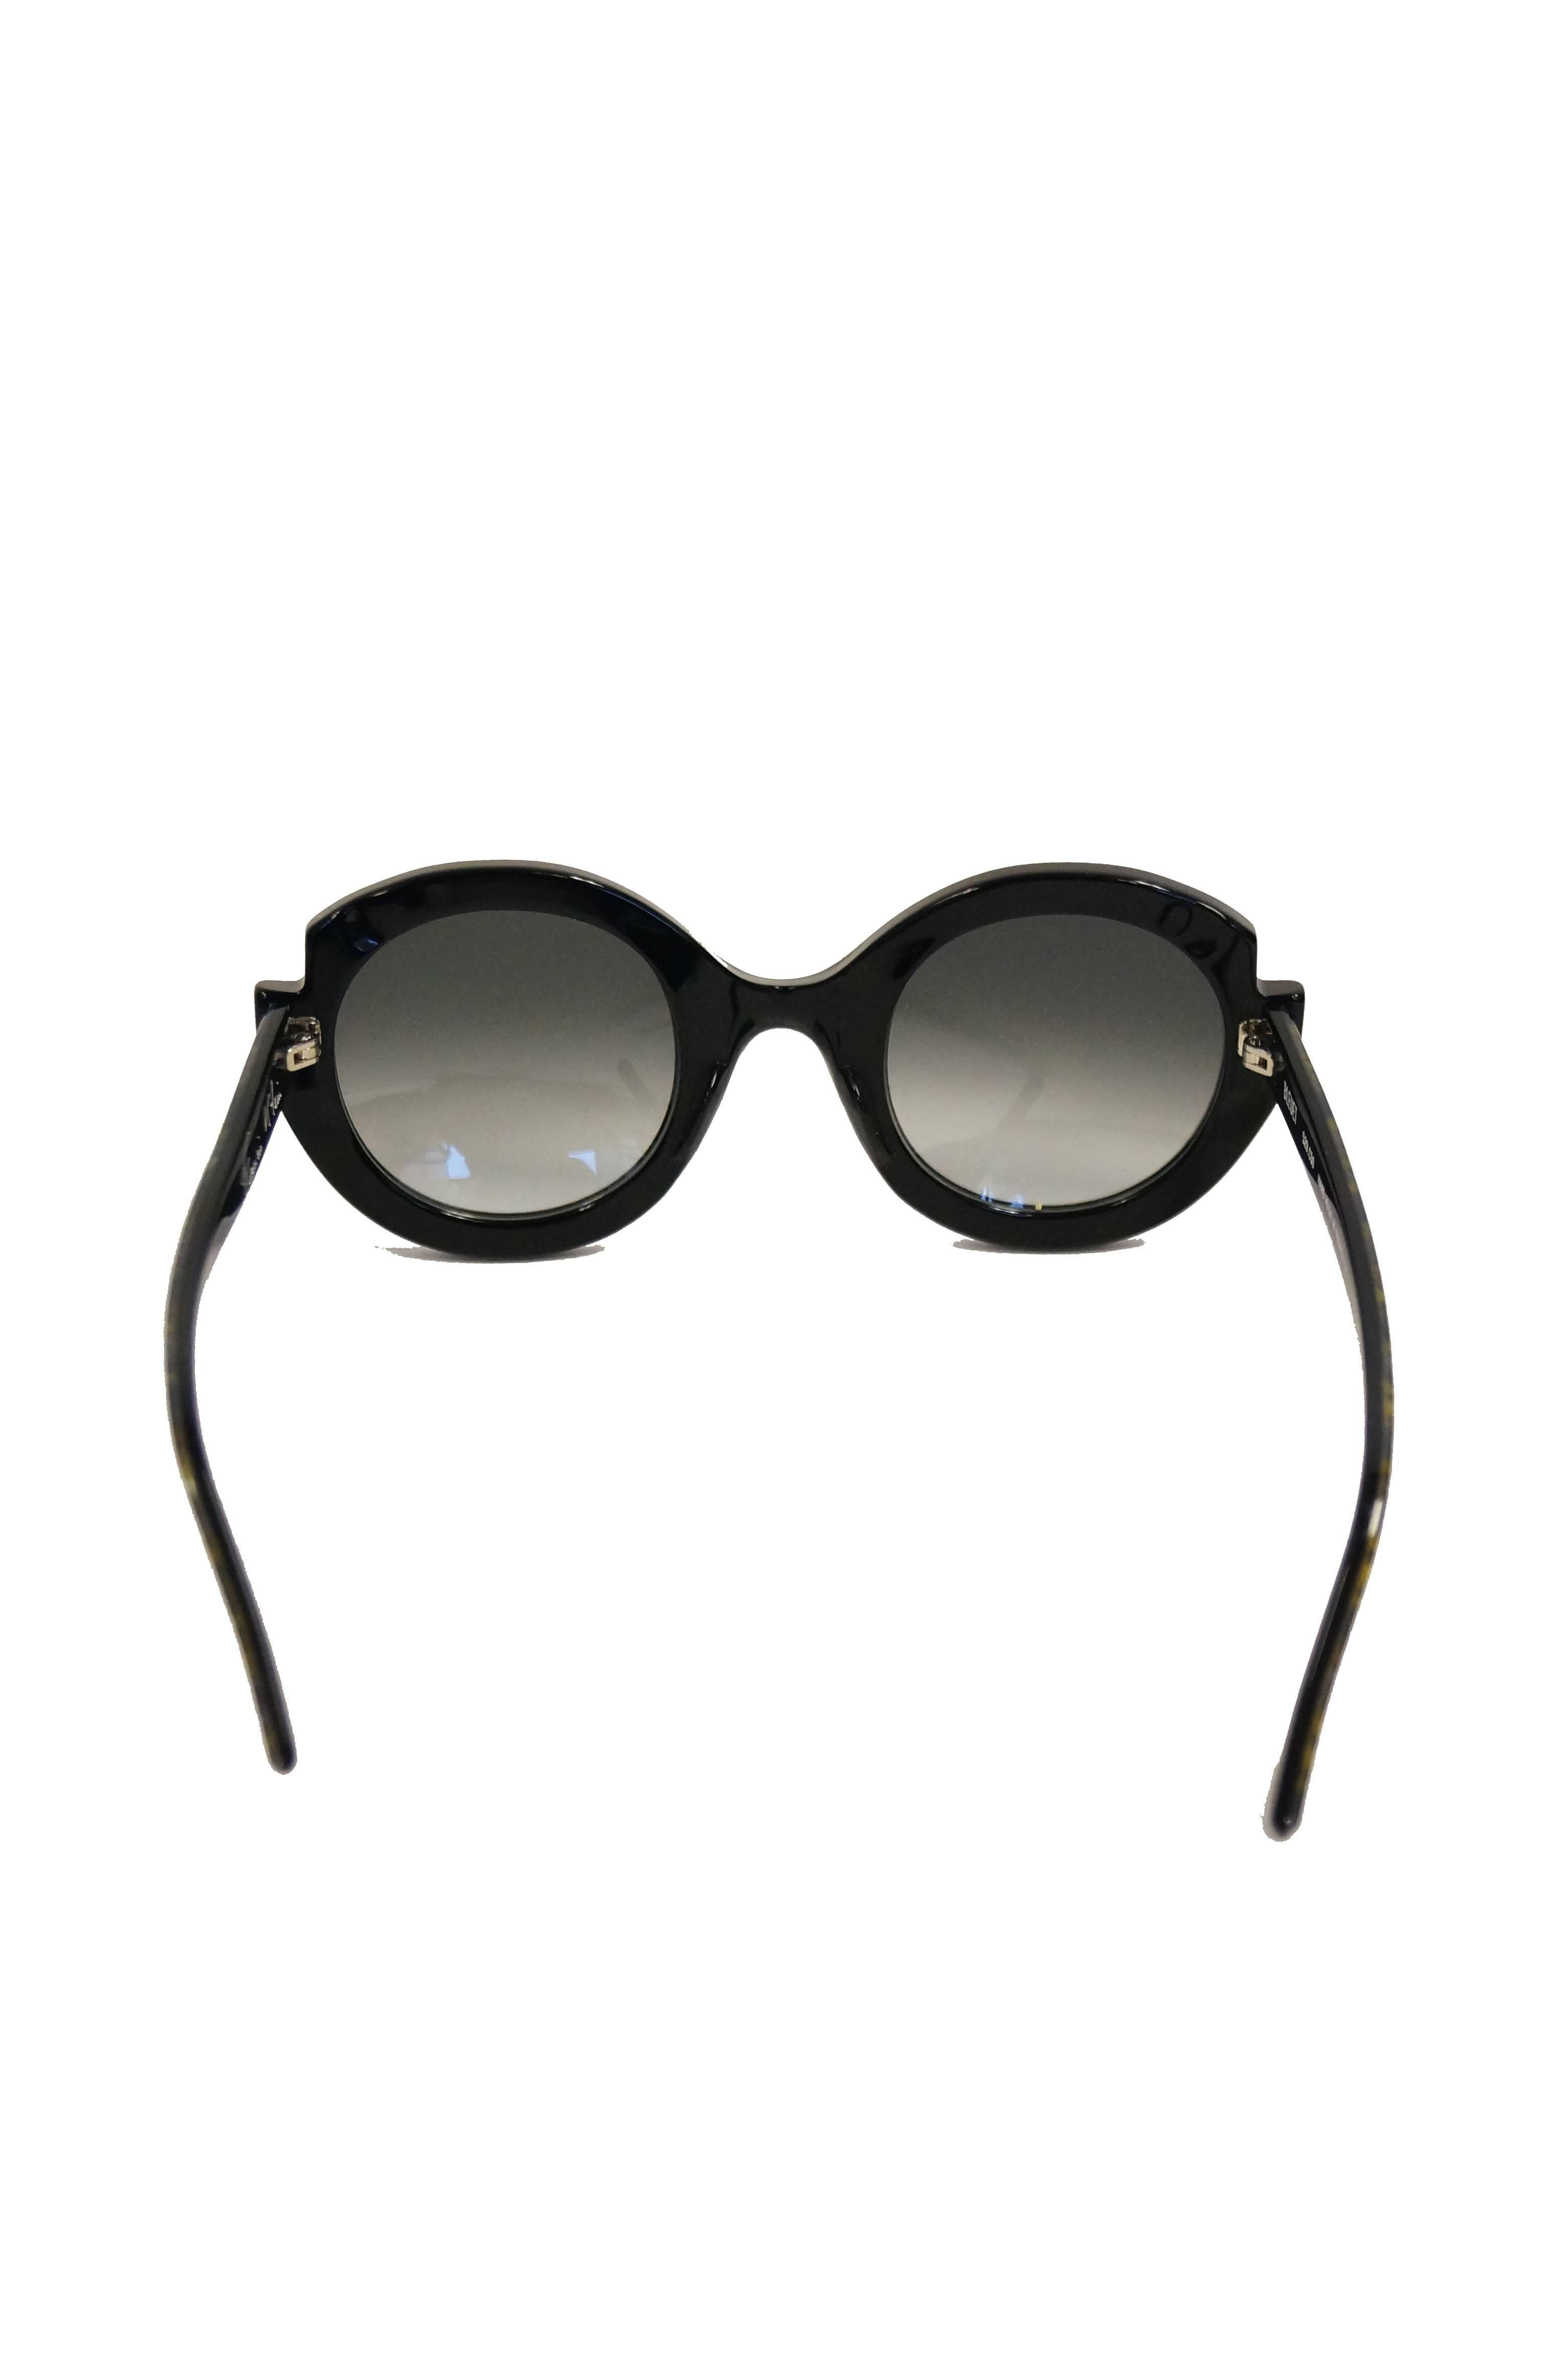 Francis Klein “Bleuet” Handmade and Handpainted Sunglasses Made In ...